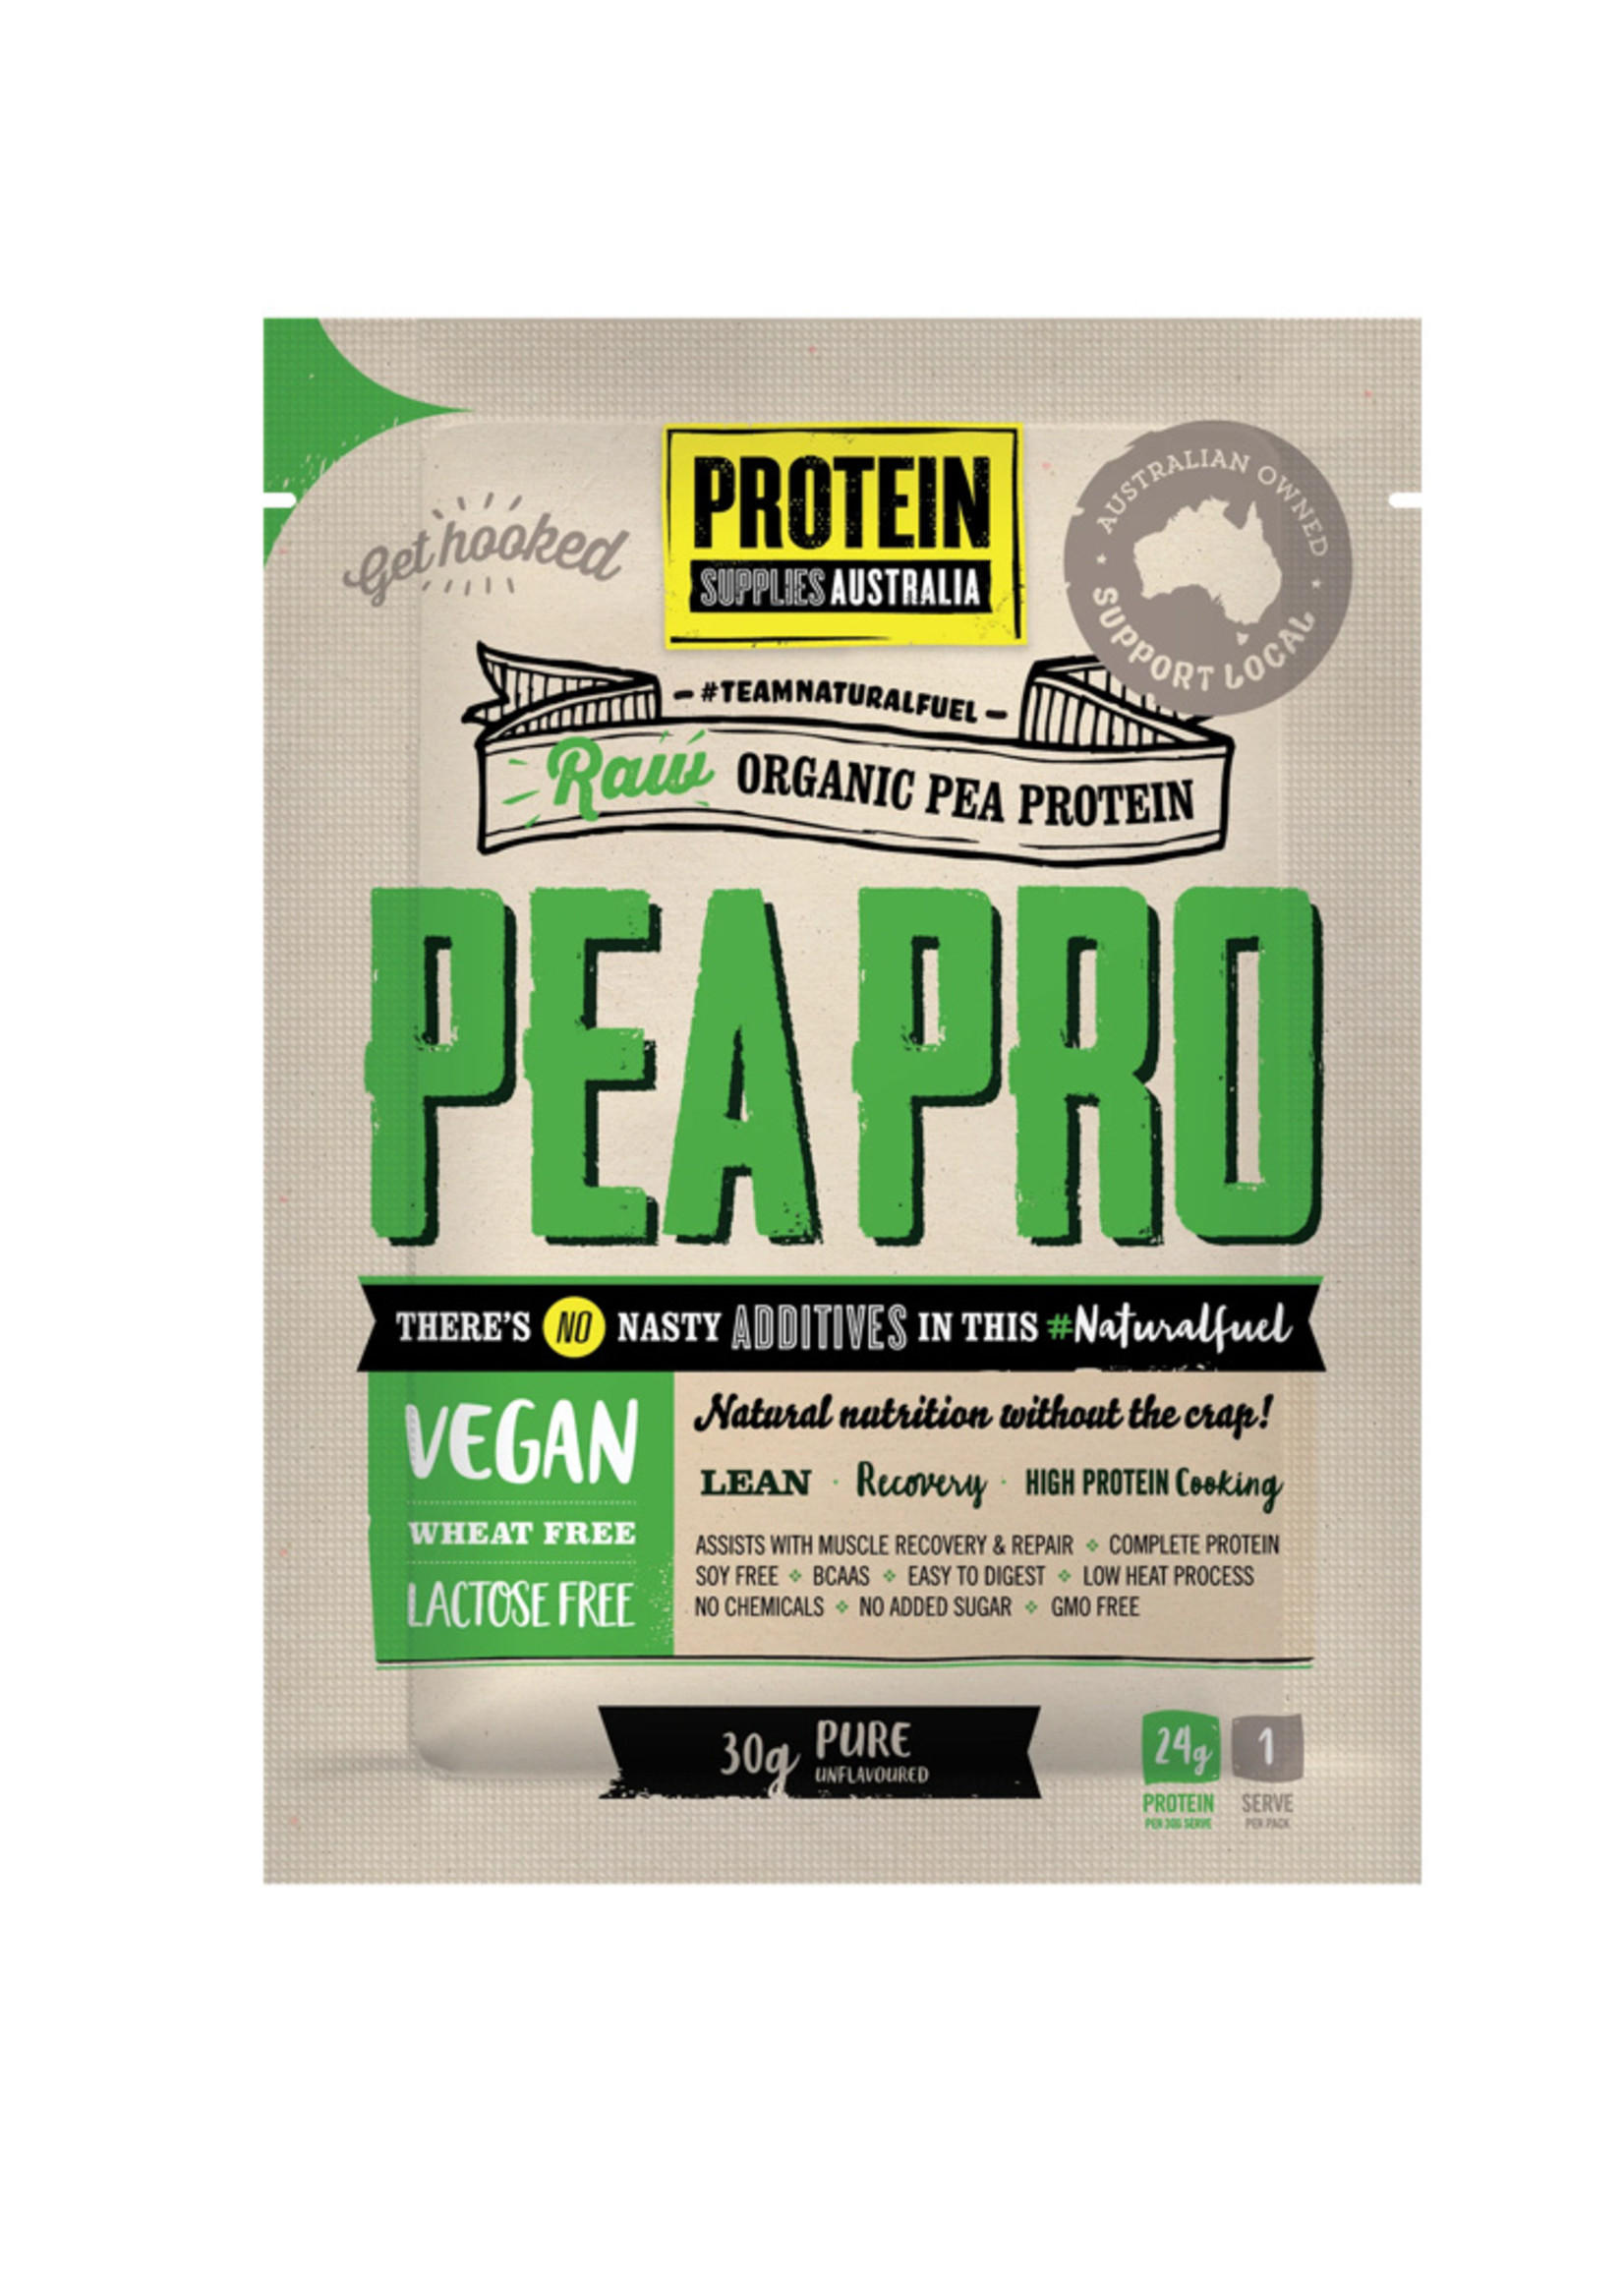 PROTEIN SUPPLIES AUST. Protein Supplies Australia PeaPro (Raw Pea Protein) Unflavoured 1kg